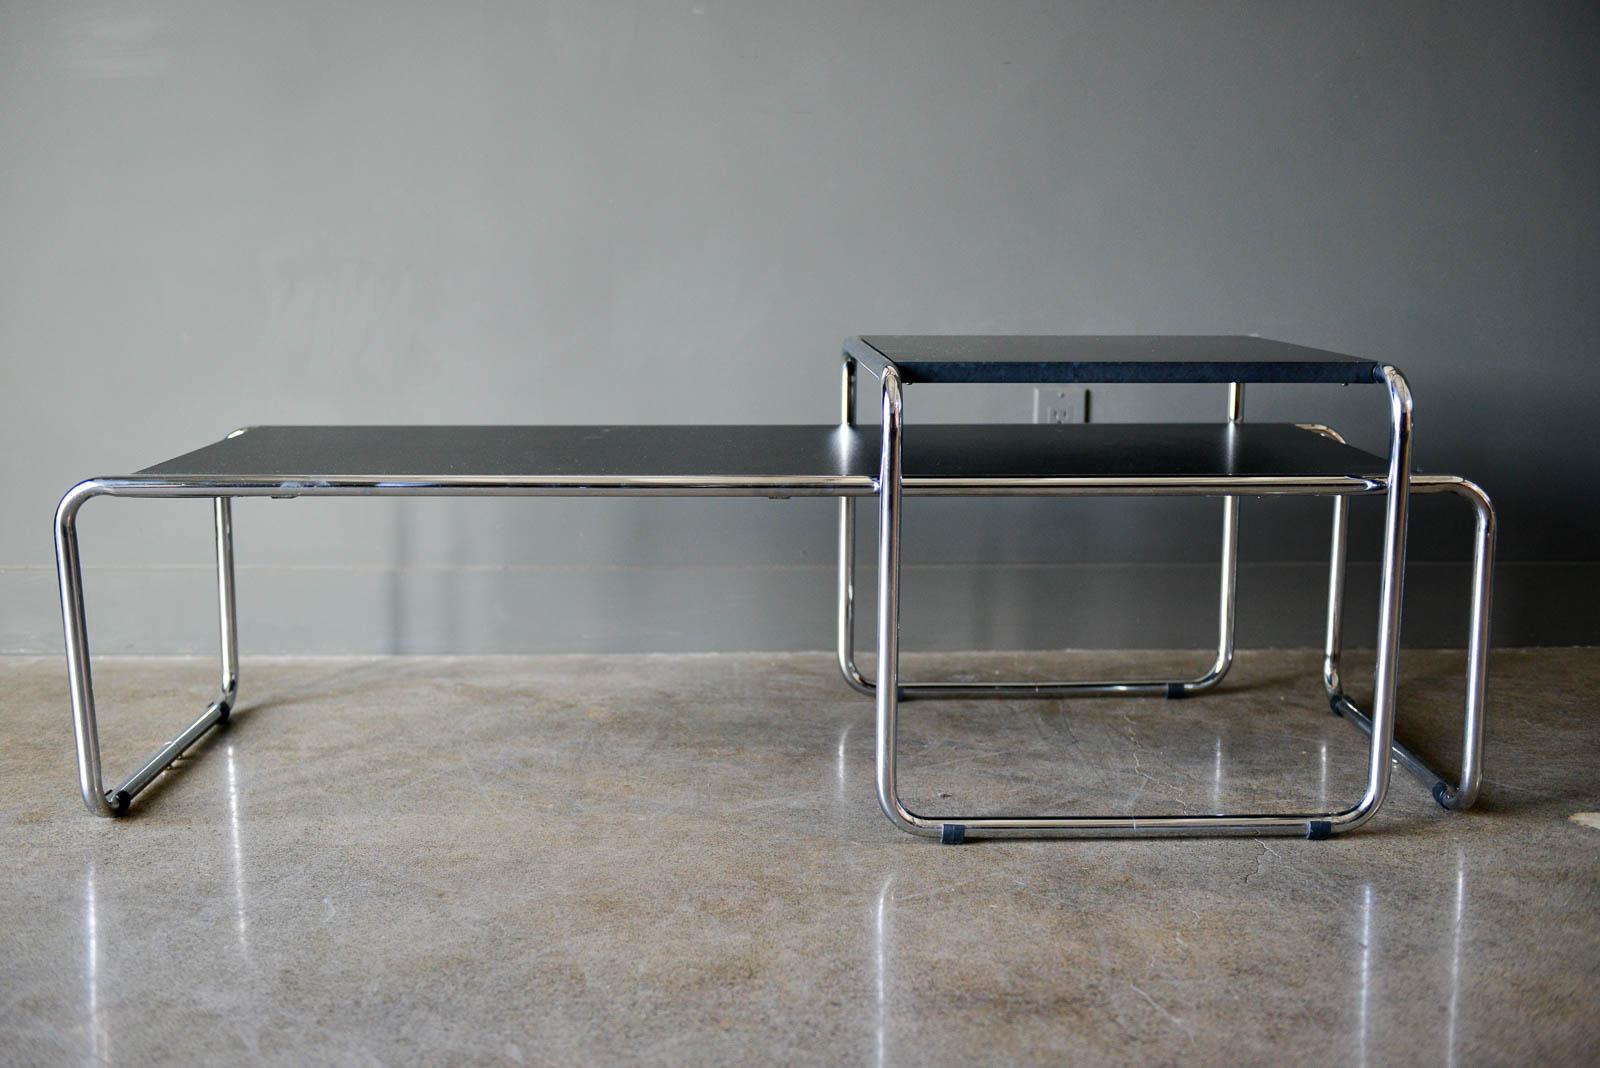 Marcel Breuer Bauhaus 'Laccio' coffee tables for Knoll. Very good original condition, with very slight wear to tops, chrome is free of rust and shiny. Sold as a set. 

Large table measures 52